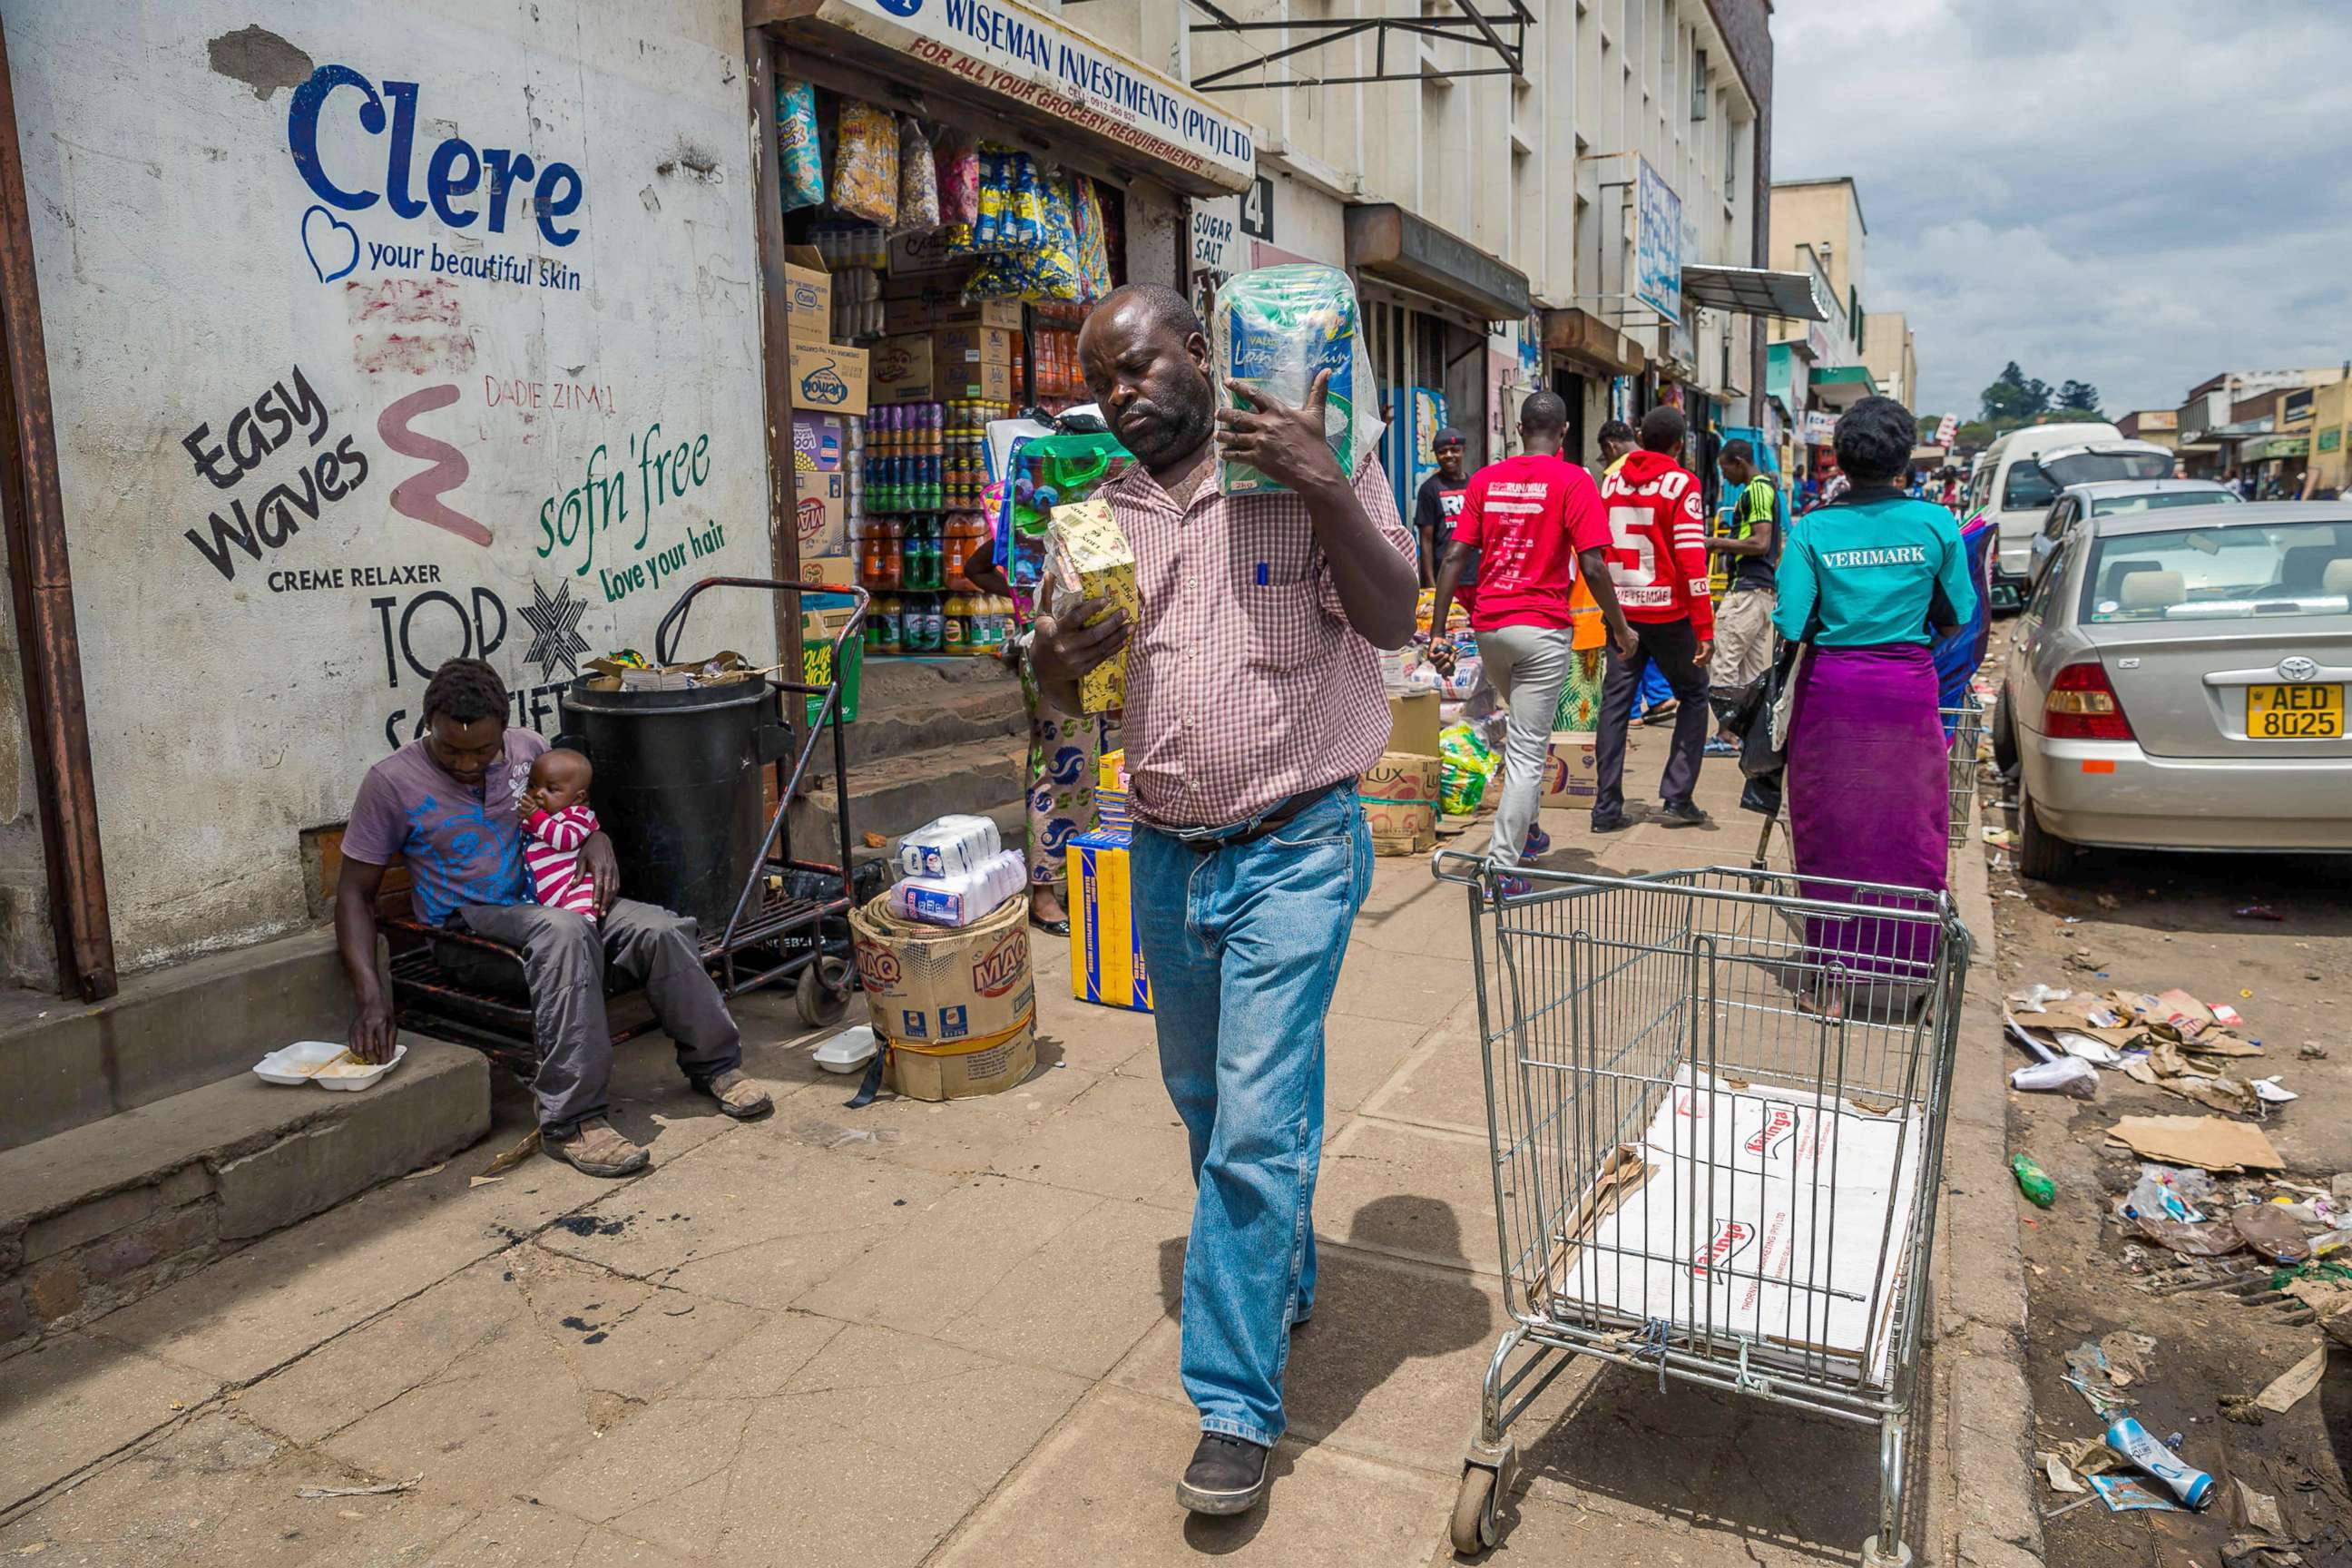 PHOTO: A man carries his wares through a market as business continues in the Zimbabwean capital Harare on Nov. 16, 2017, a day after the military announced plans to arrest "criminals" close to the president. 